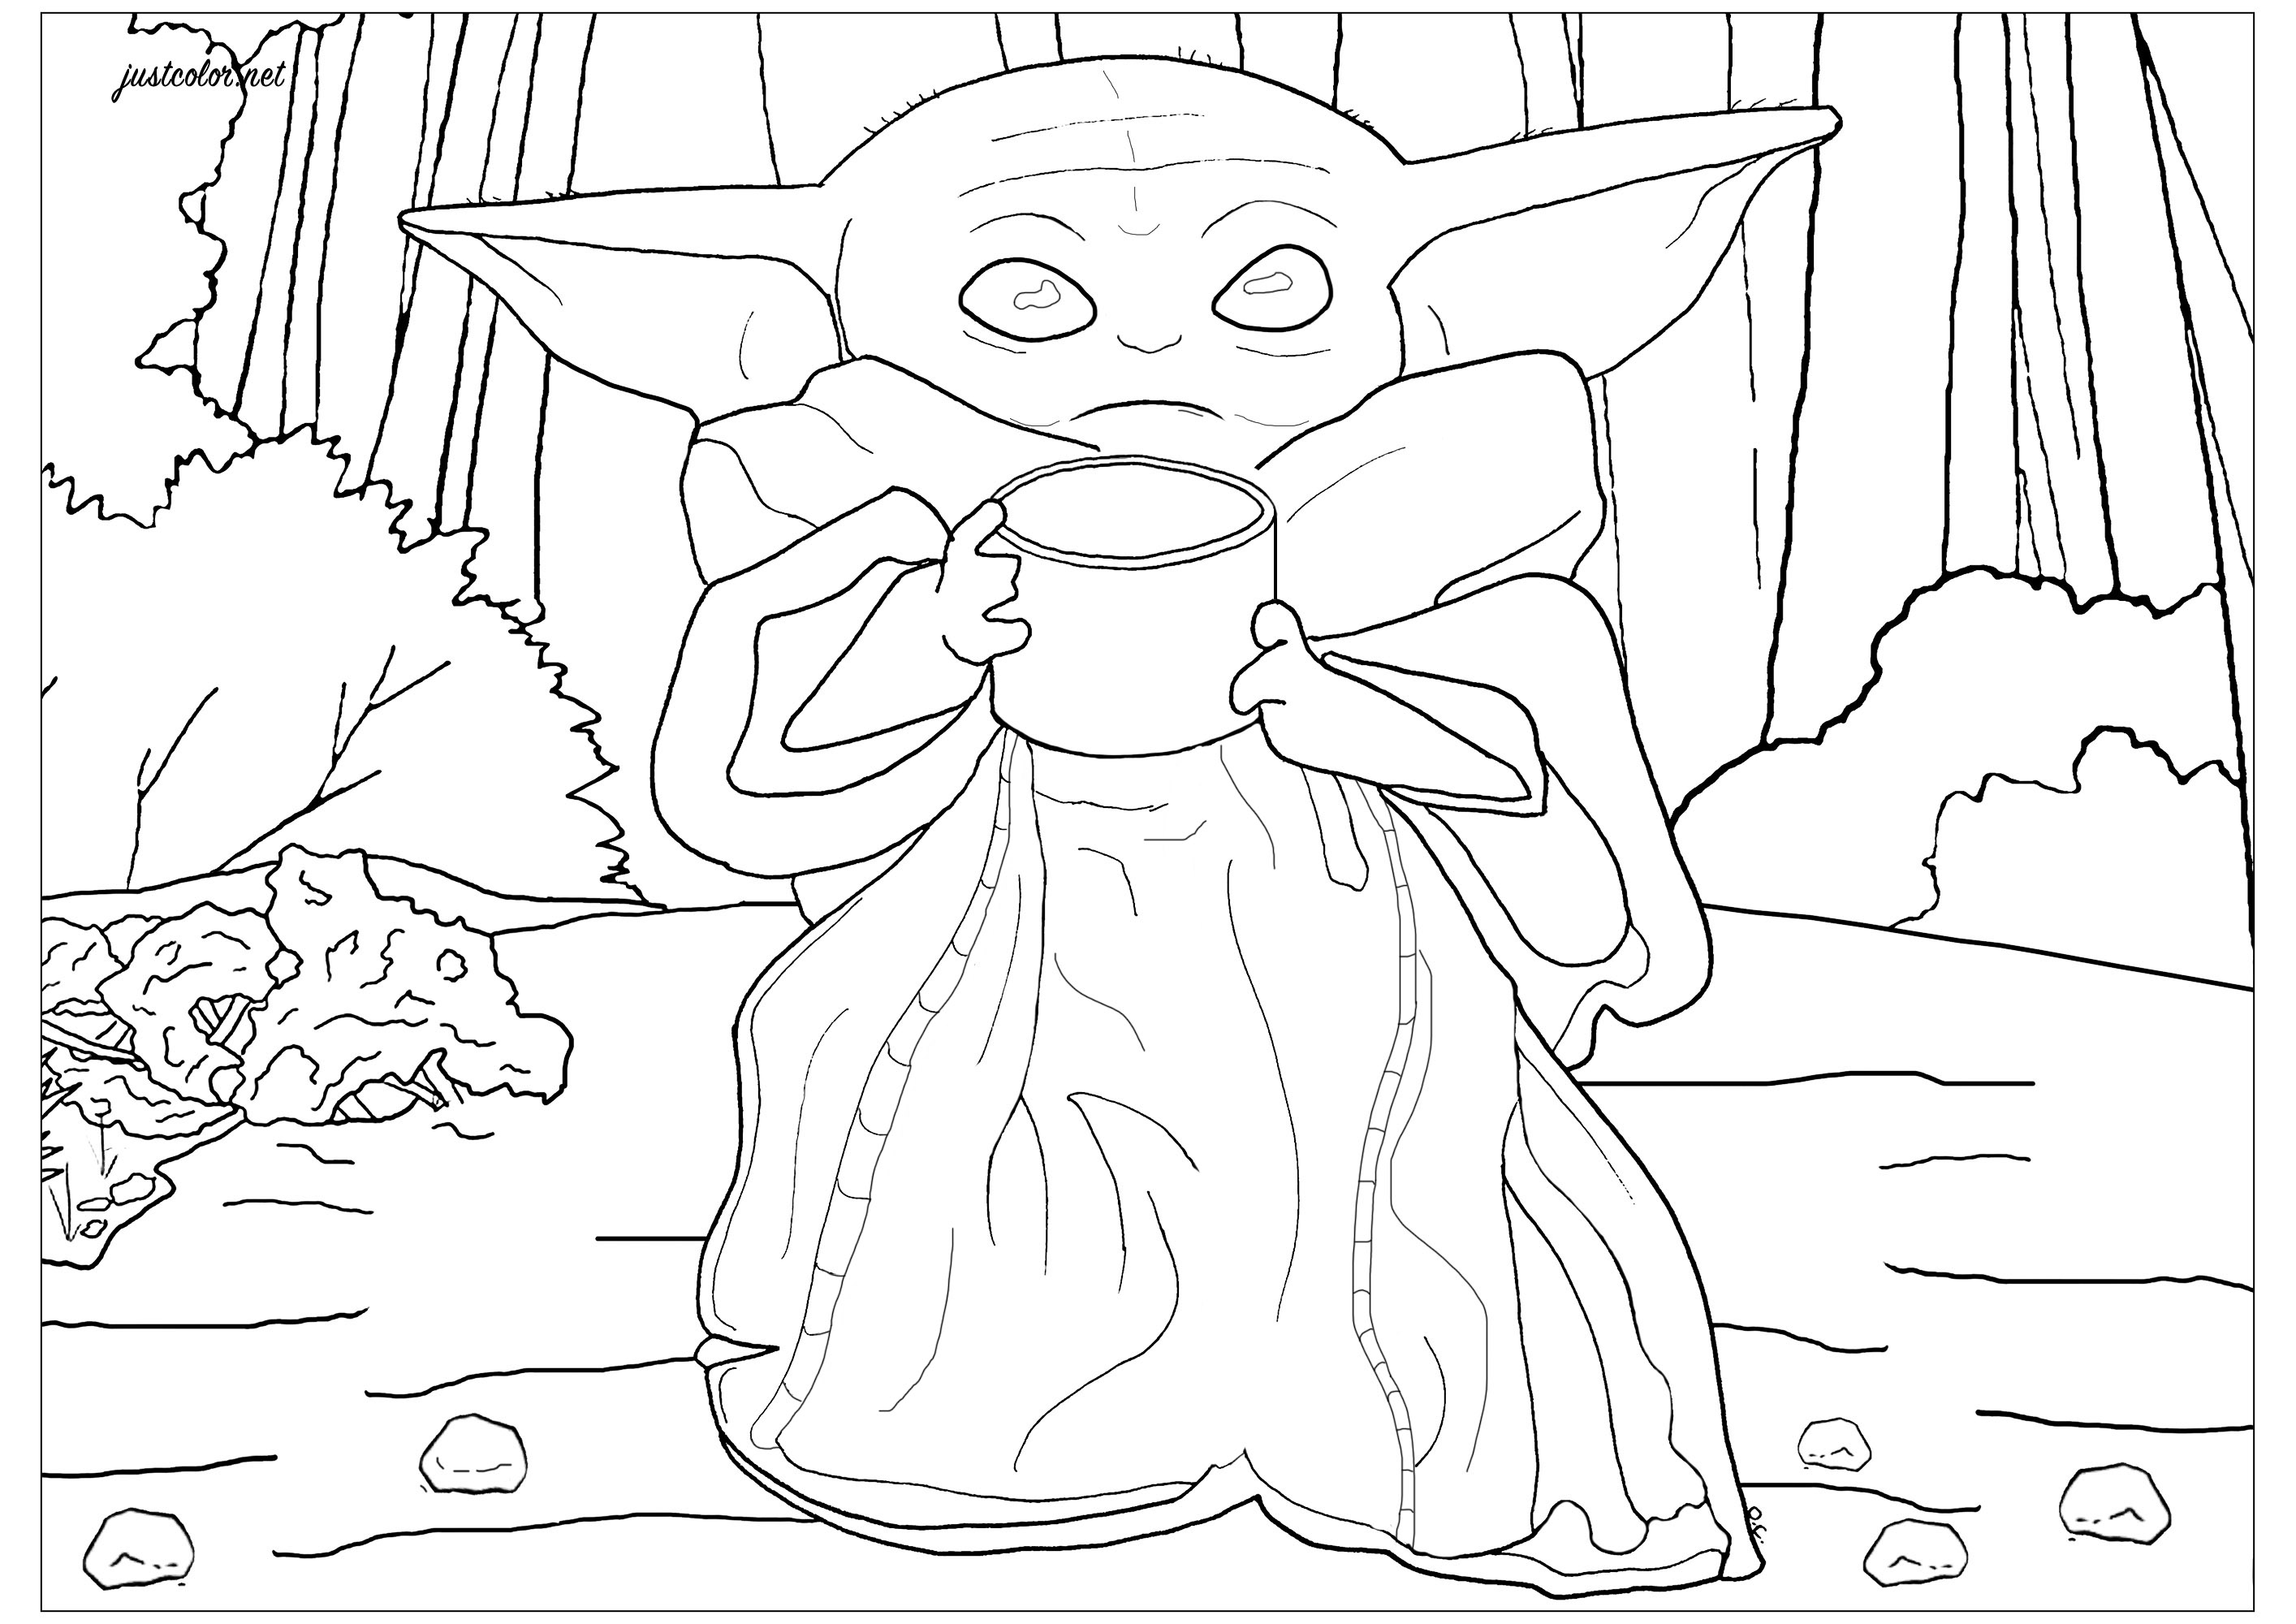 Baby Yoda The Child - Movies Adult Coloring Pages